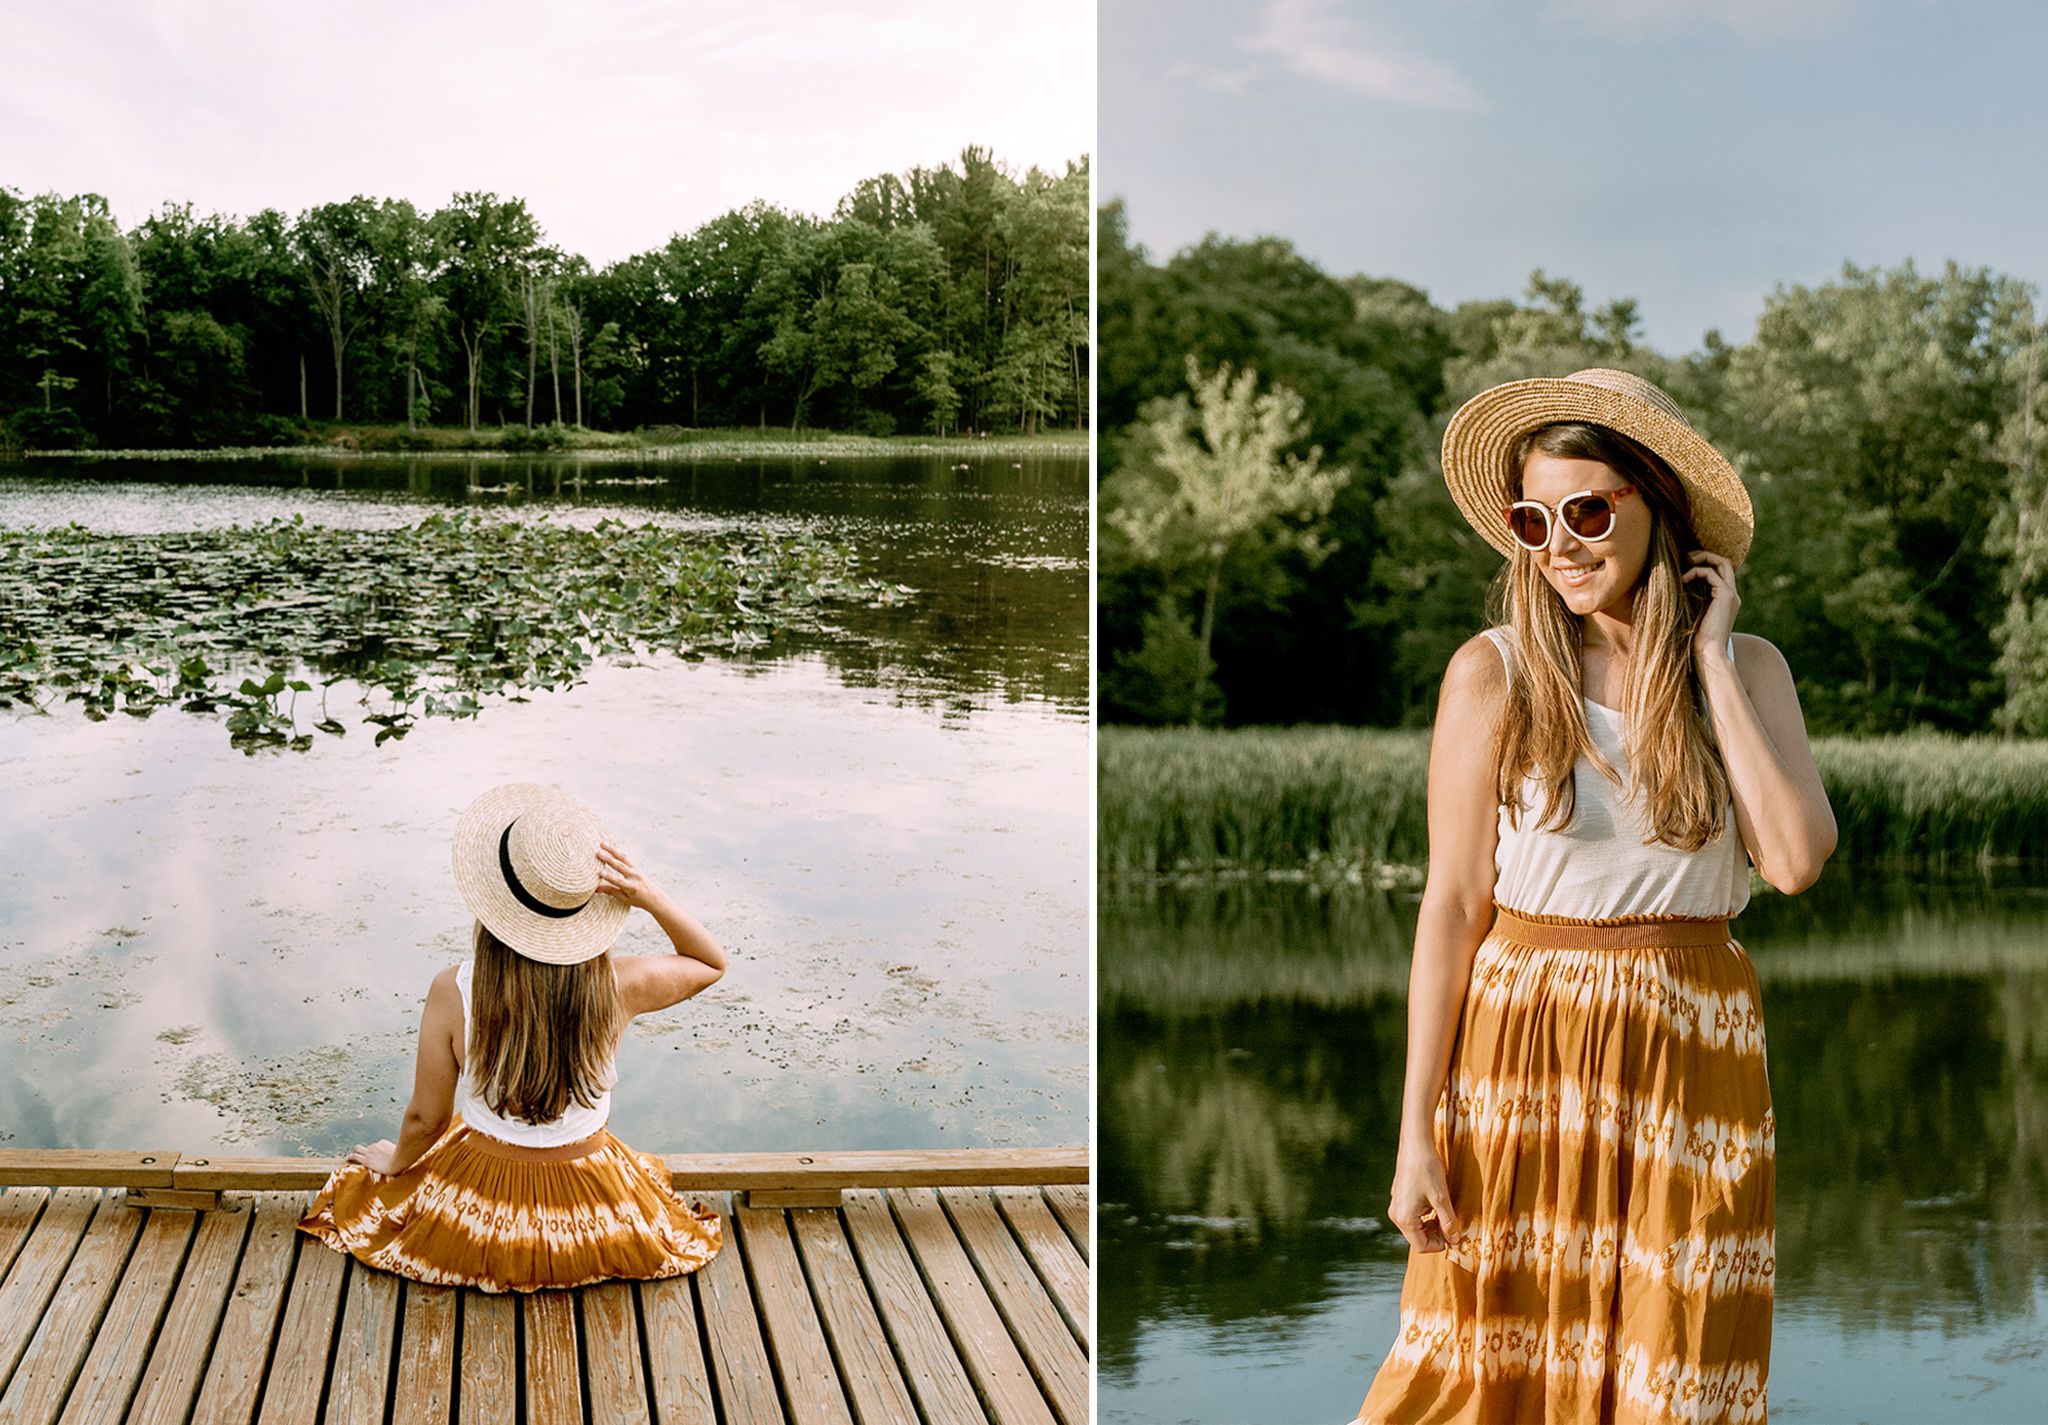 People in nature, Photograph, Clothing, Water, Beauty, Dress, Summer, Fashion, Grass, Photography, 